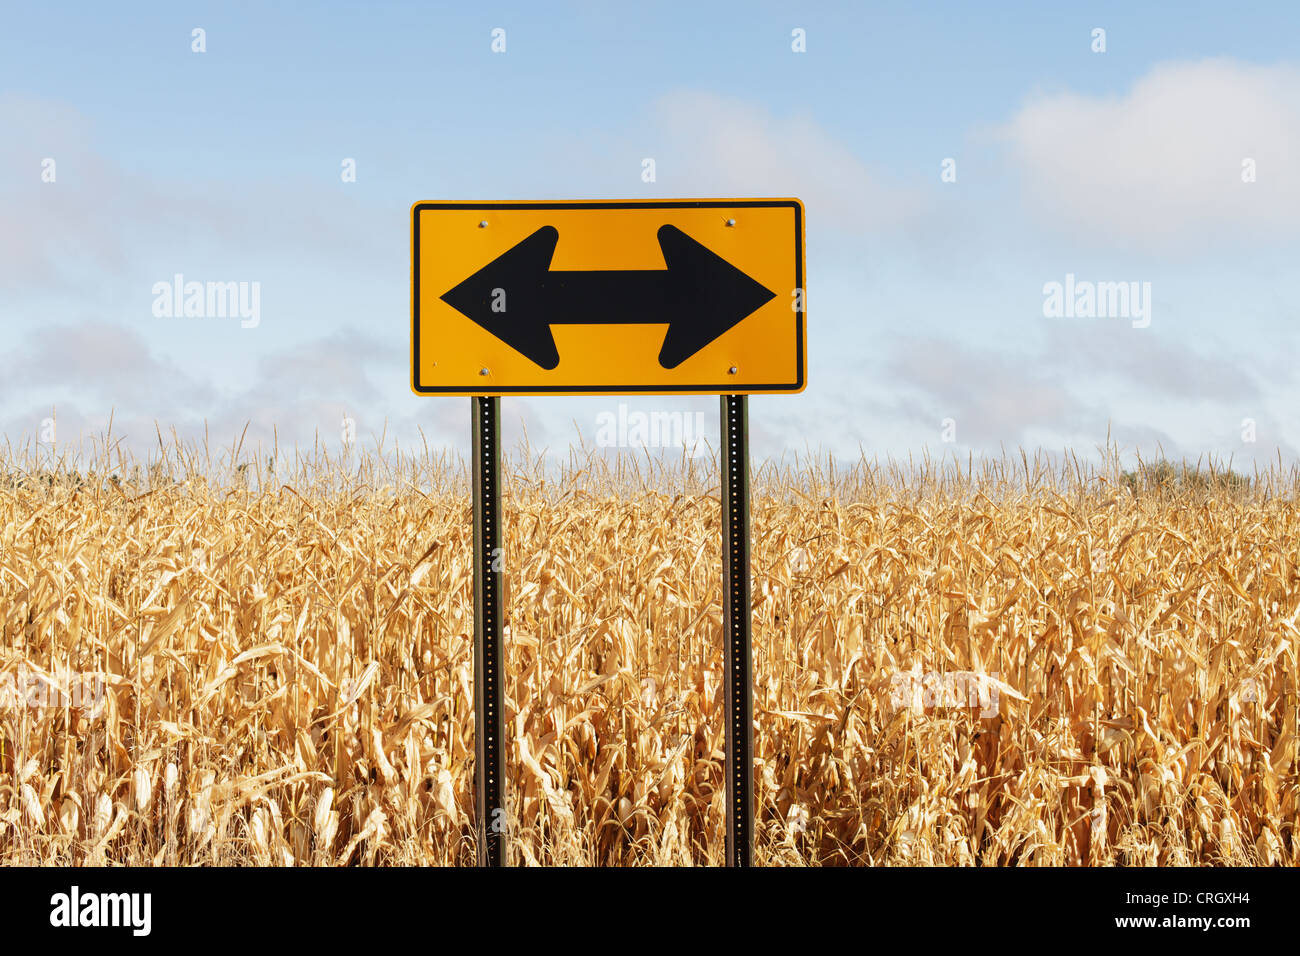 A directional arrow sign in a corn field. Stock Photo